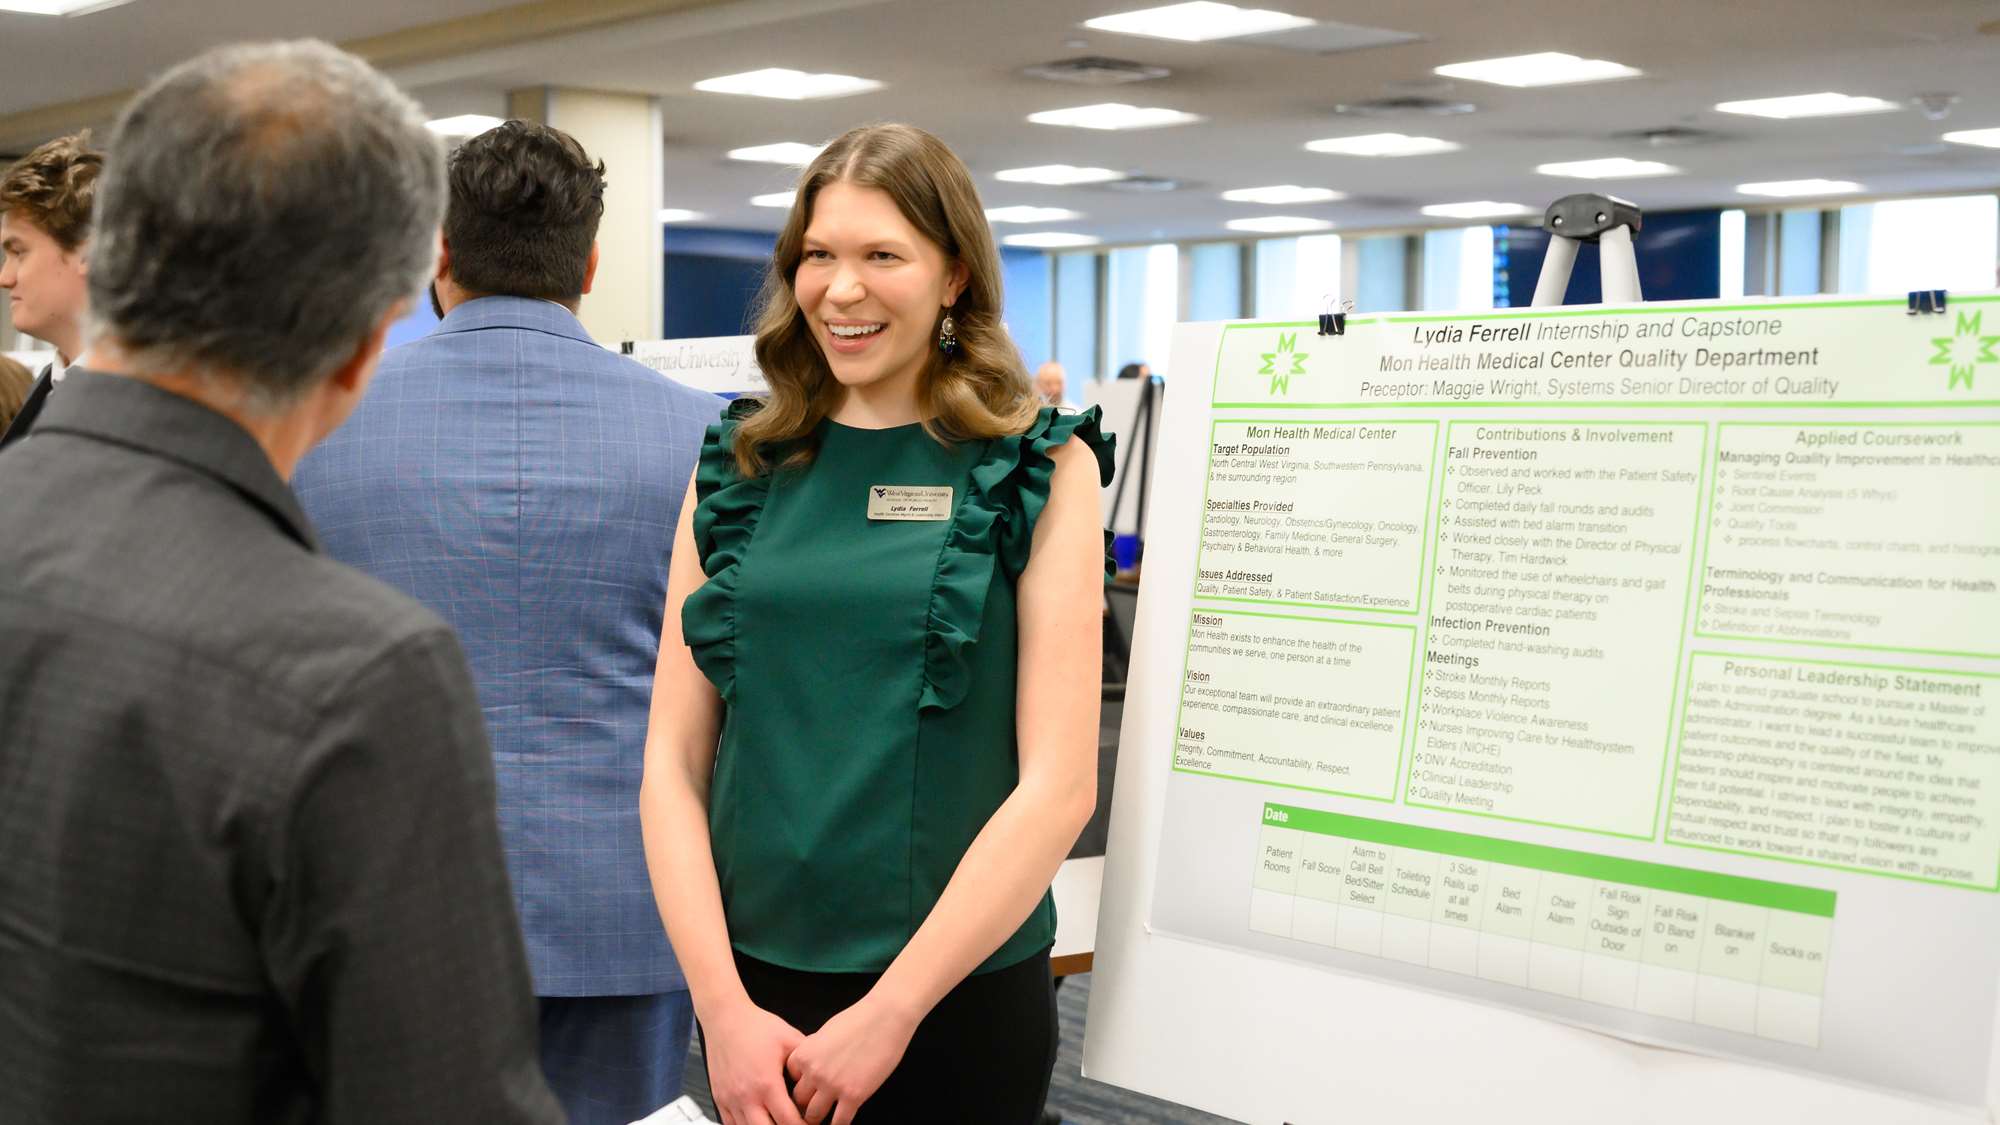 Public Health student Lydia Ferrell stands beside her poster, wearing a green top and smiling as she presents to a faculty member 